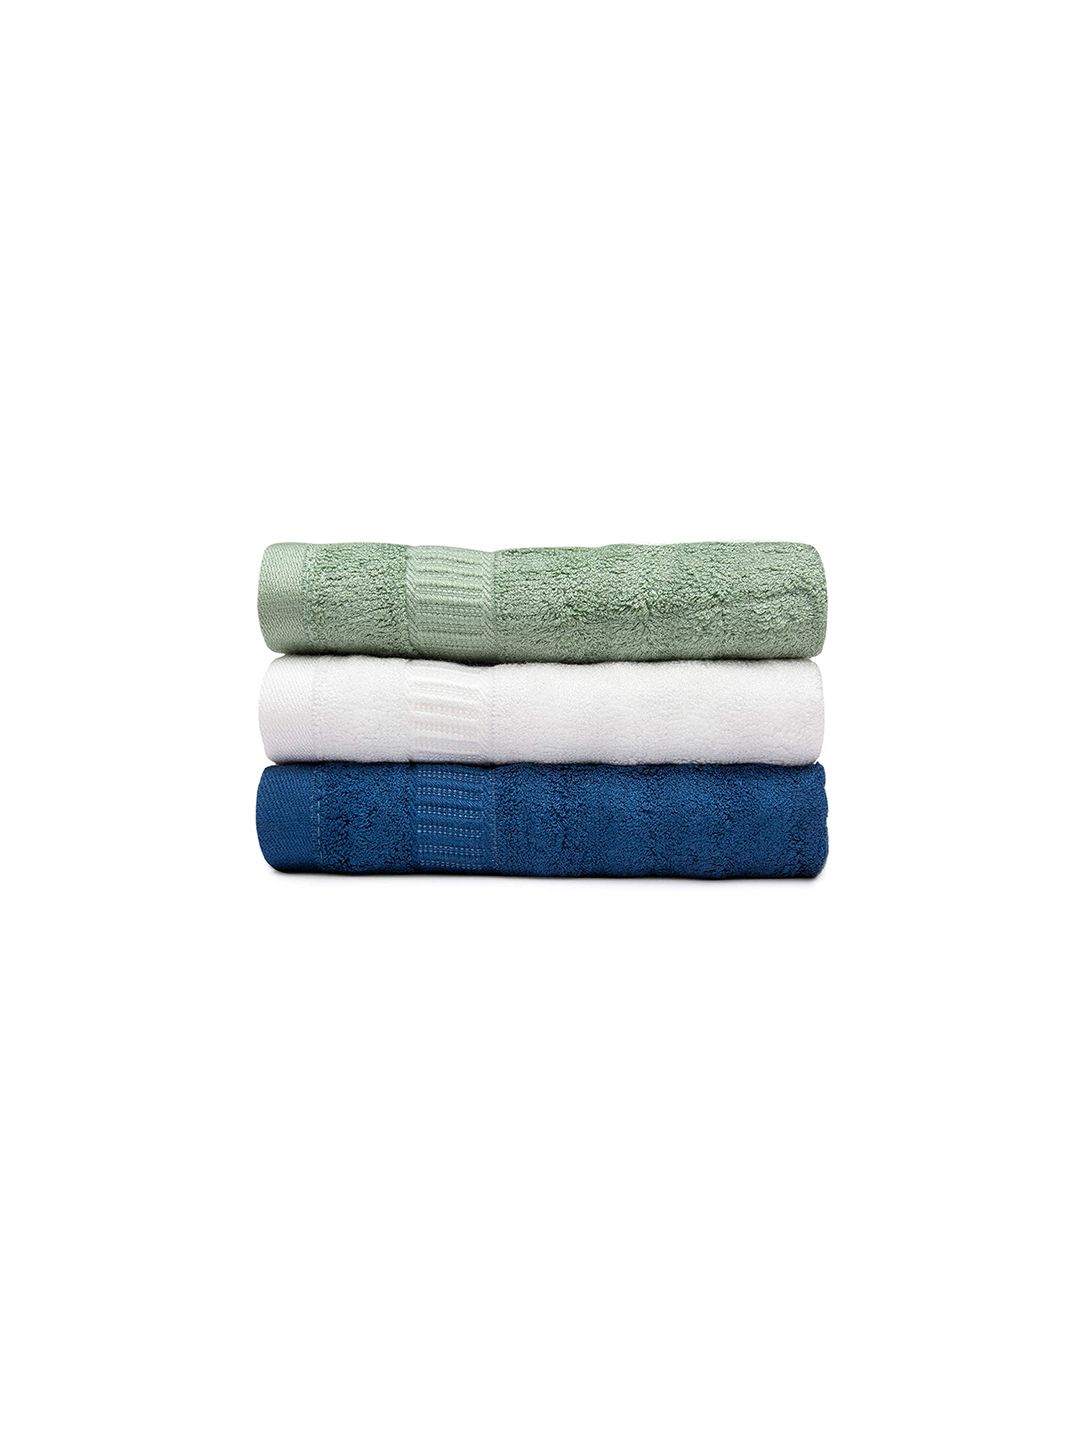 MUSH Set Of 3 Bamboo 600 GSM Ultra Soft & Eco Friendly Face Towels Price in India